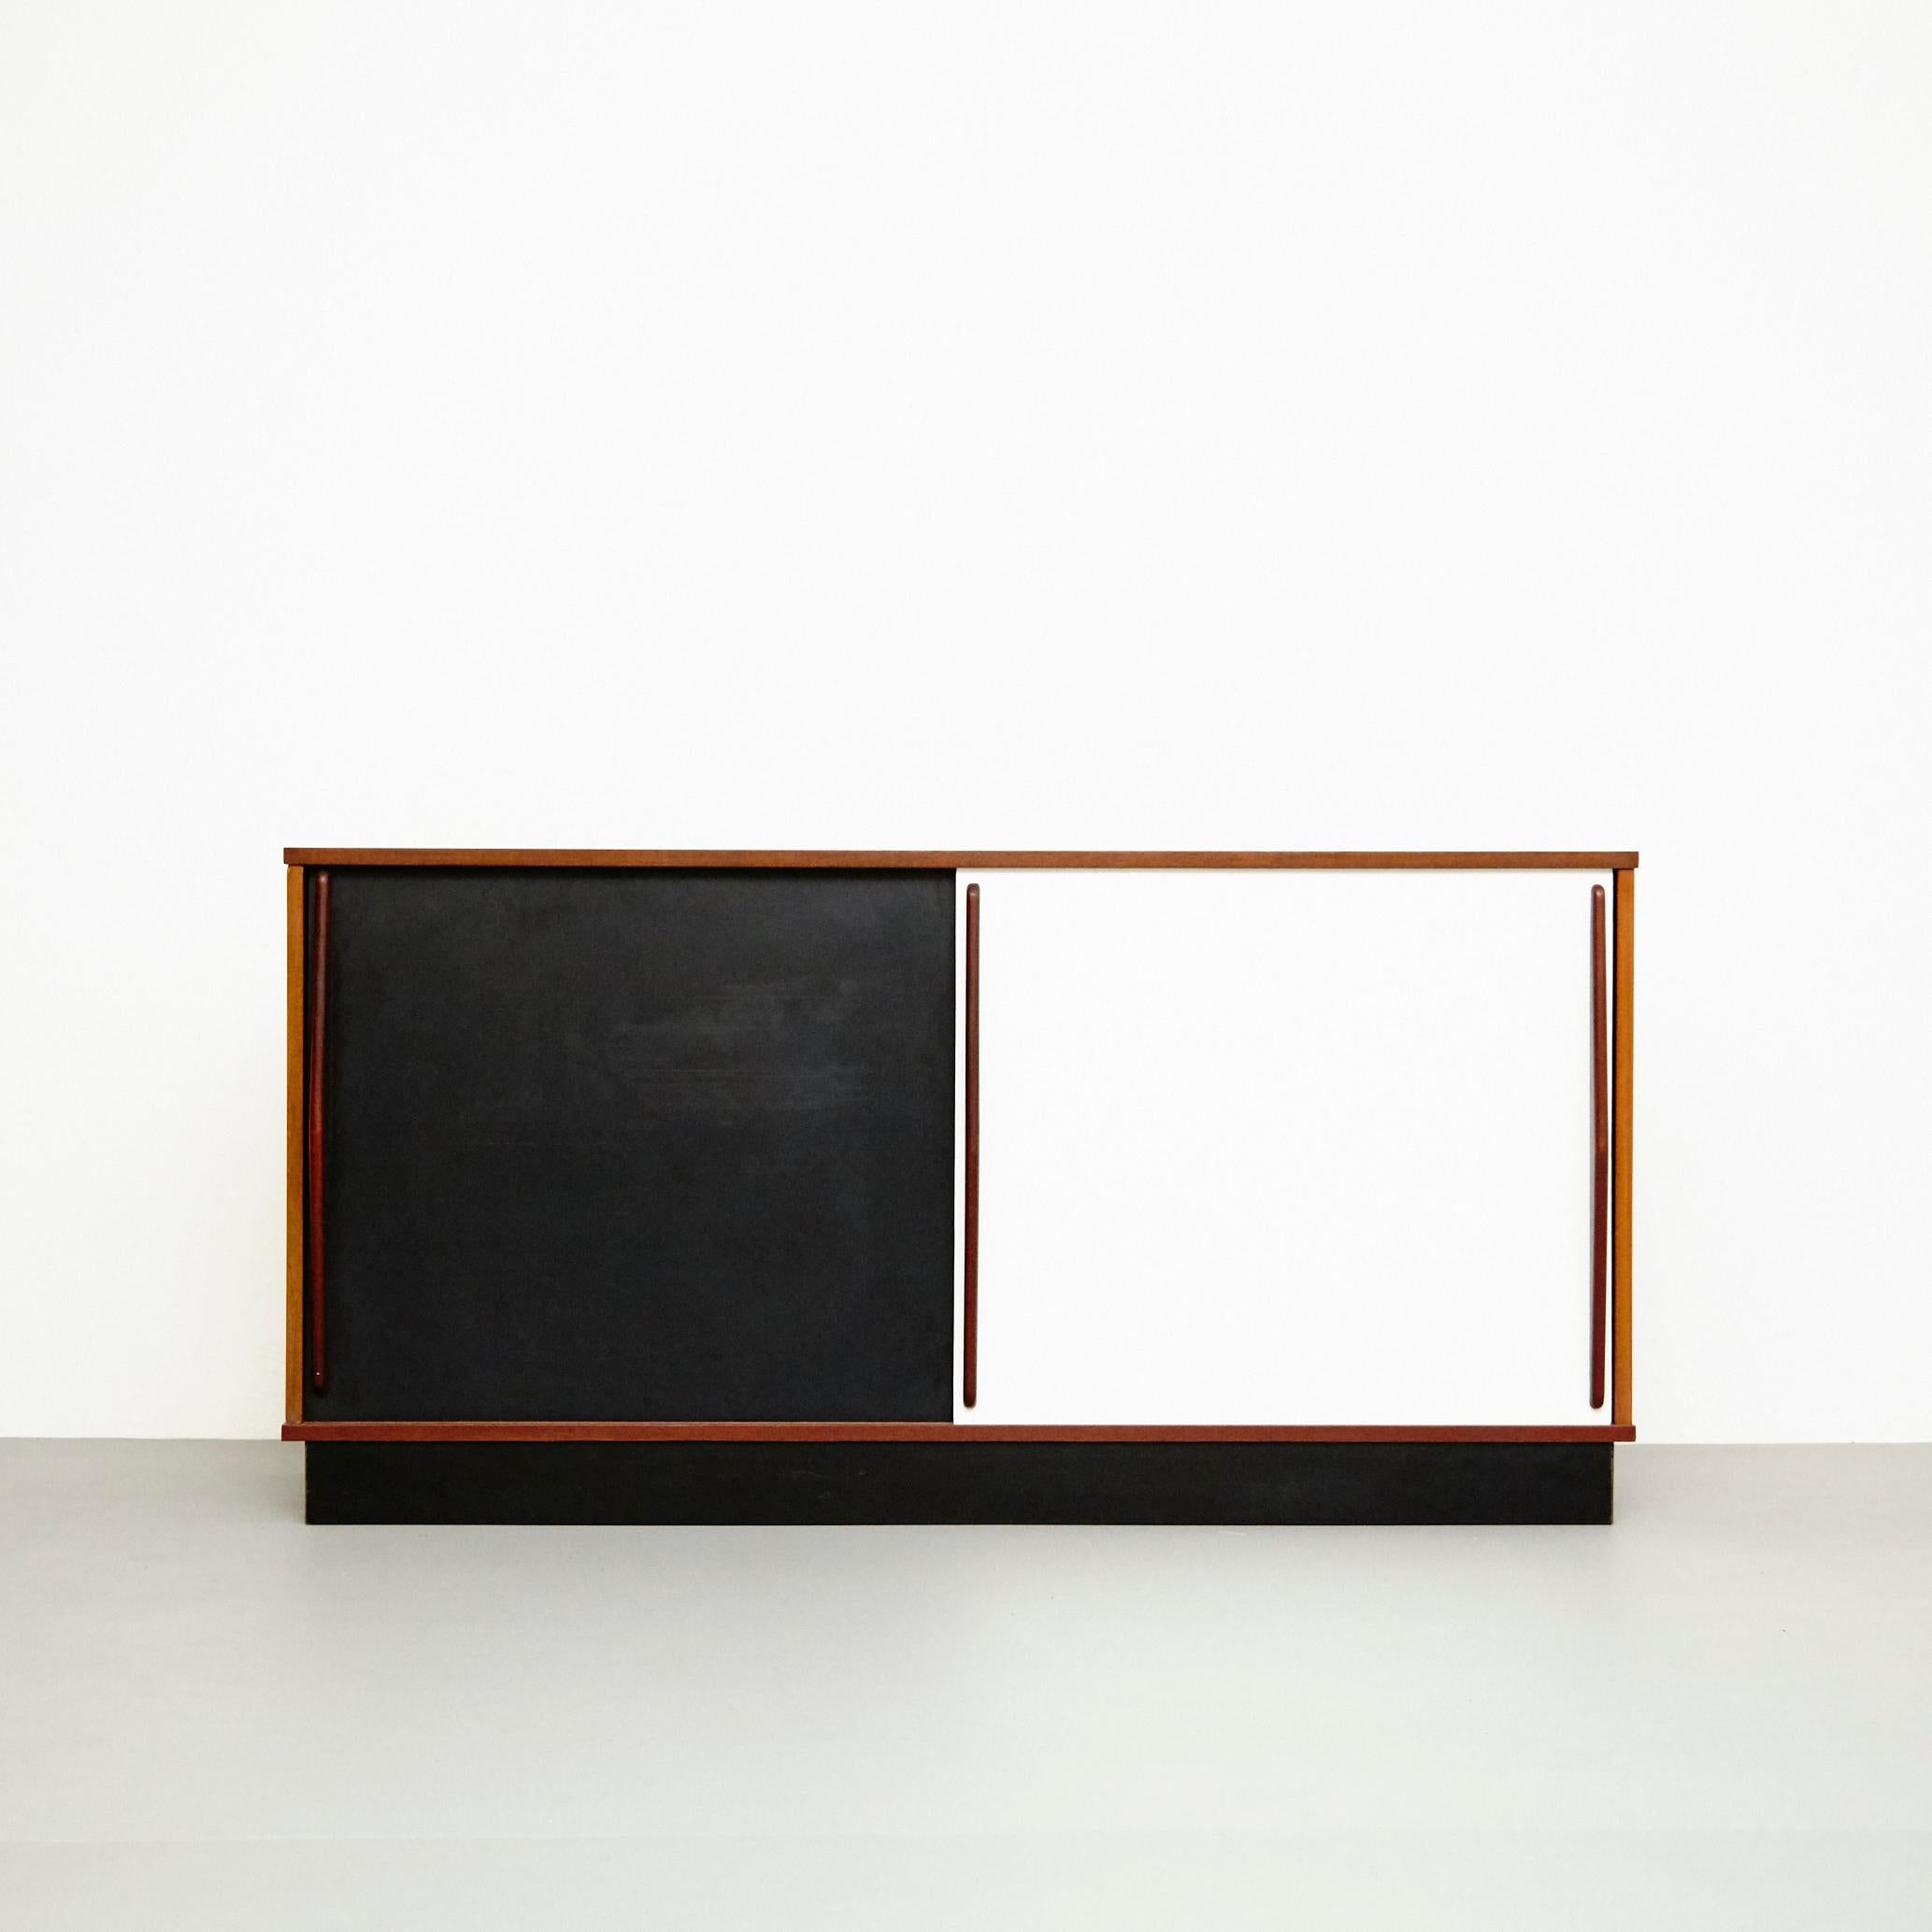 Sideboard designed by Charlotte Perriand, circa 1950.
Edited by Steph Simon, (France)

Wood structure and grips, lacquered sliding doors.

Provenance: Cansado, Mauritania (Africa)

In original condition, with wear consistent with age and use,